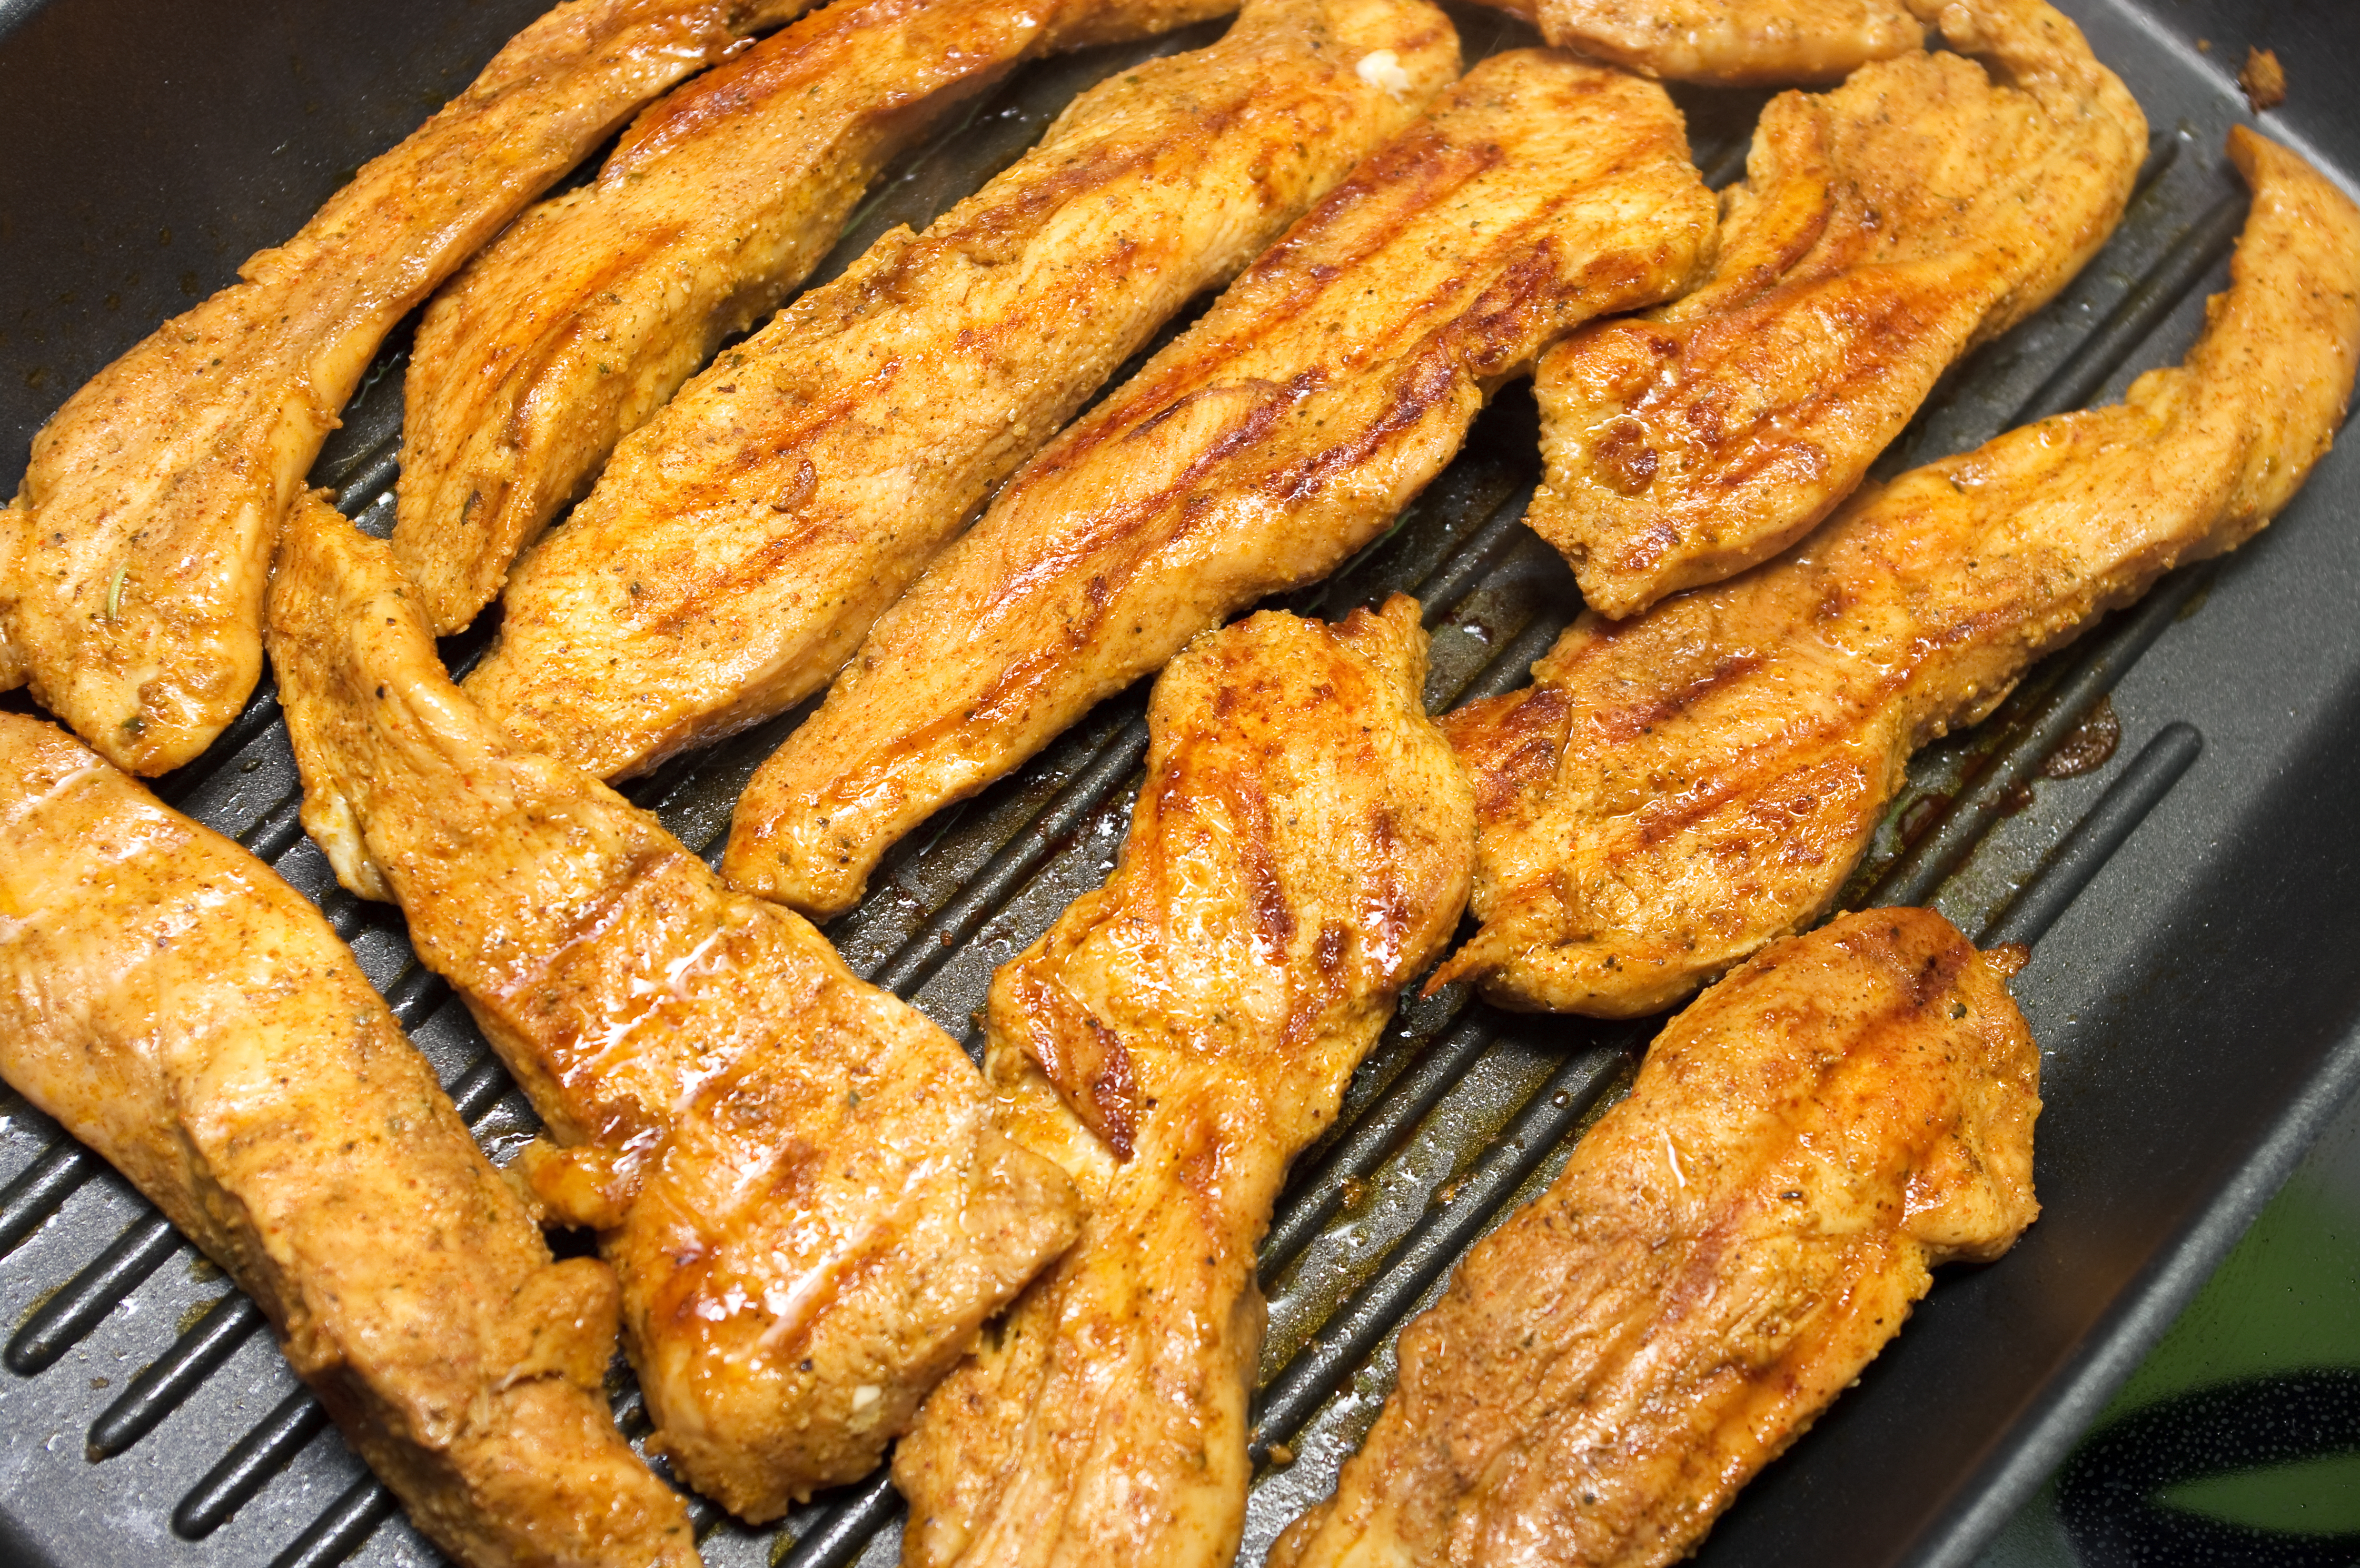 Cook and season your chicken. | Source: Shutterstock